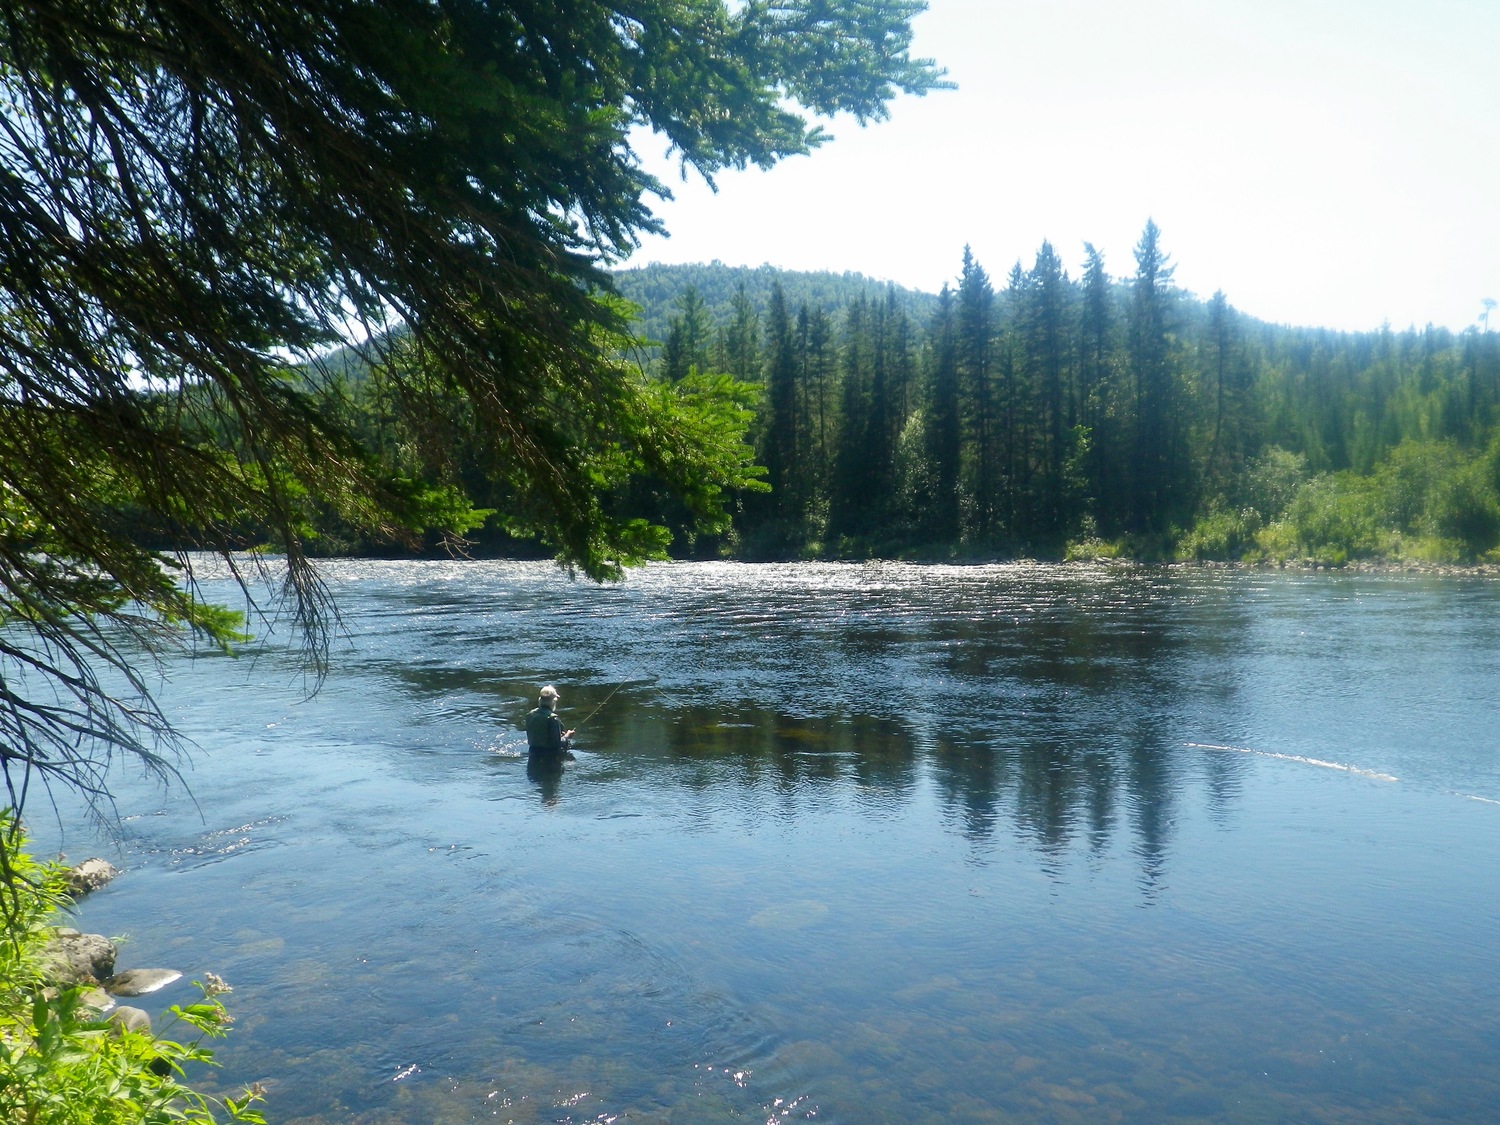 Can you imagine anywhere nicer than this to swing flies for Atlantic Salmon? Stunning river and scenery 